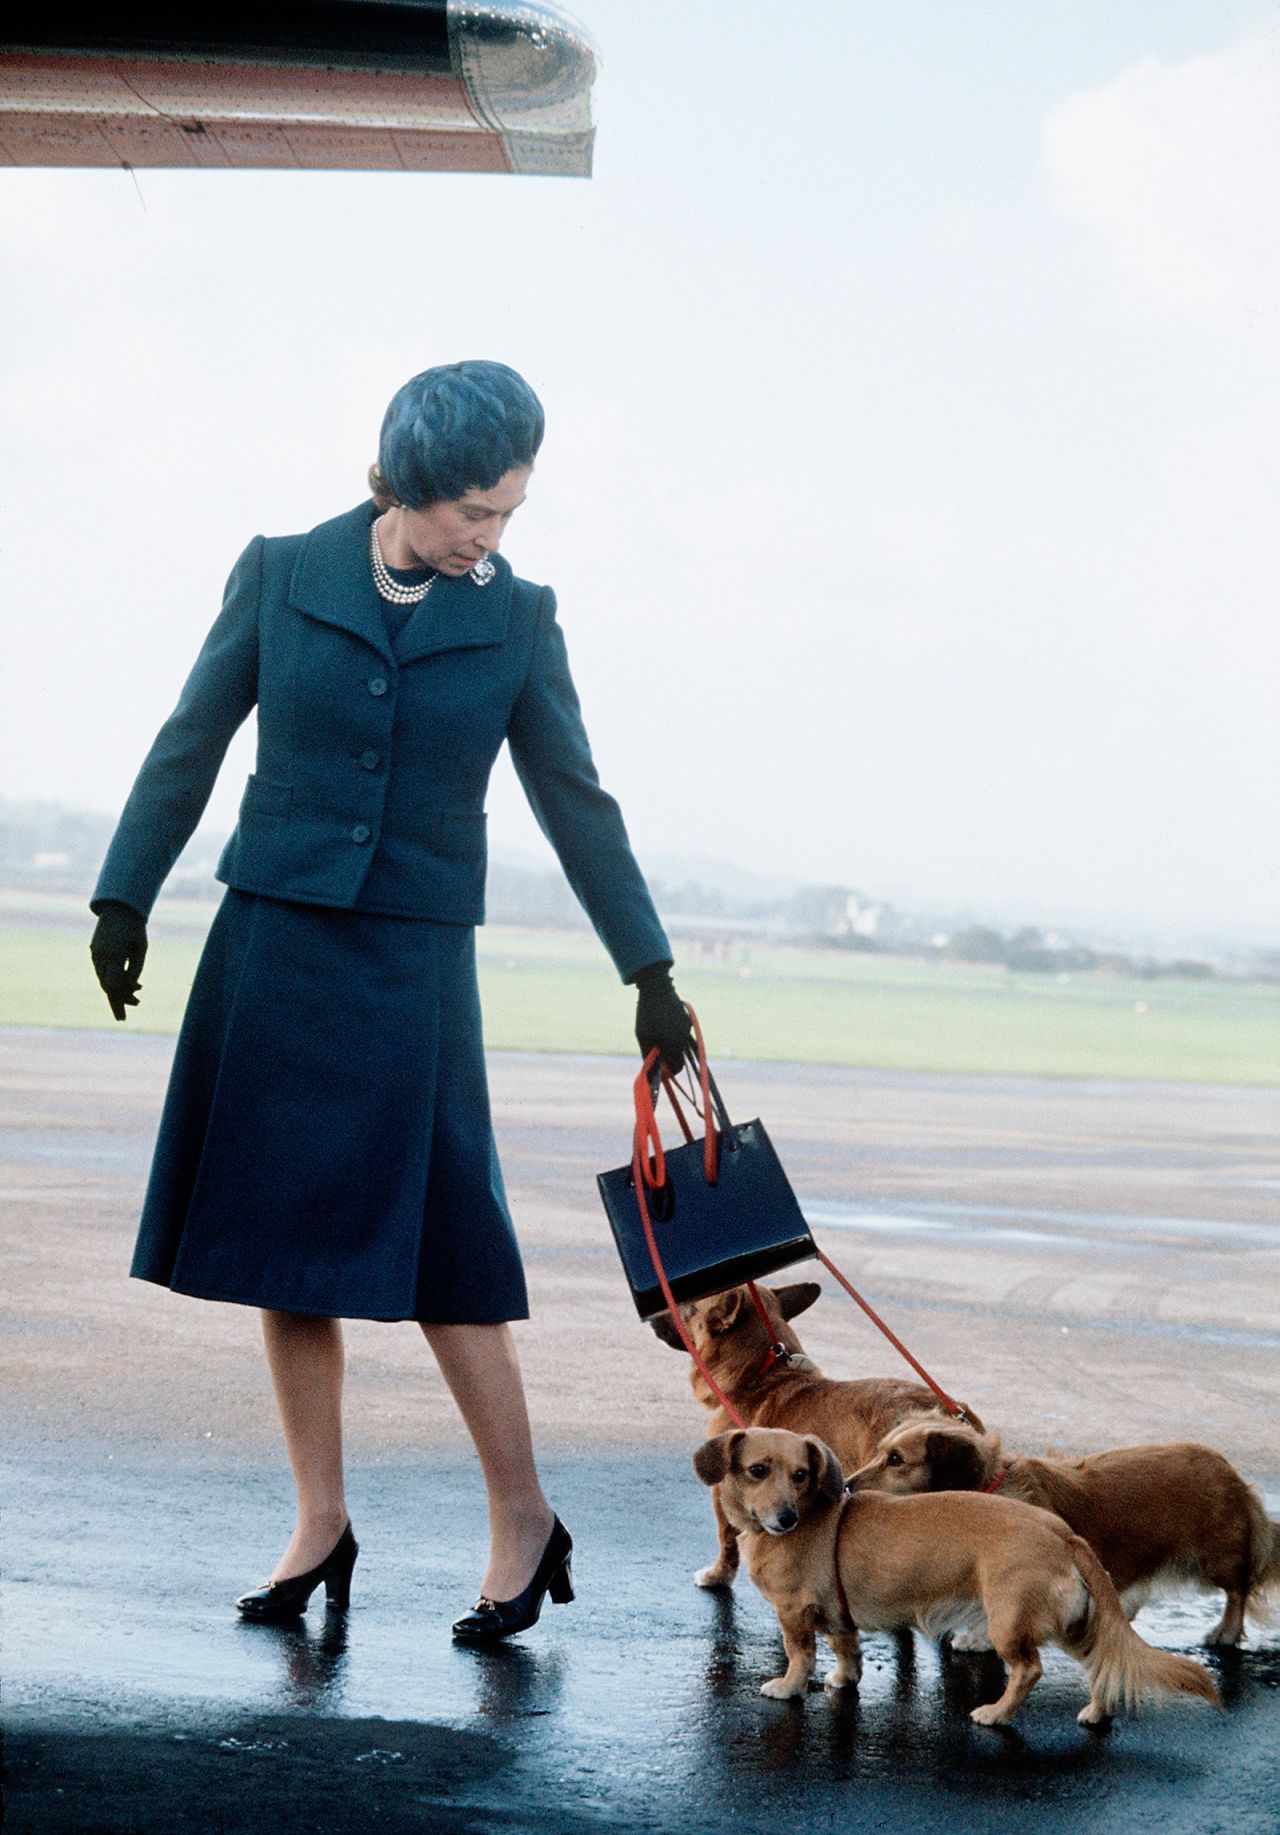 The Queen and her corgis arrive at Aberdeen Airport to start a vacation in Scotland in 1974.